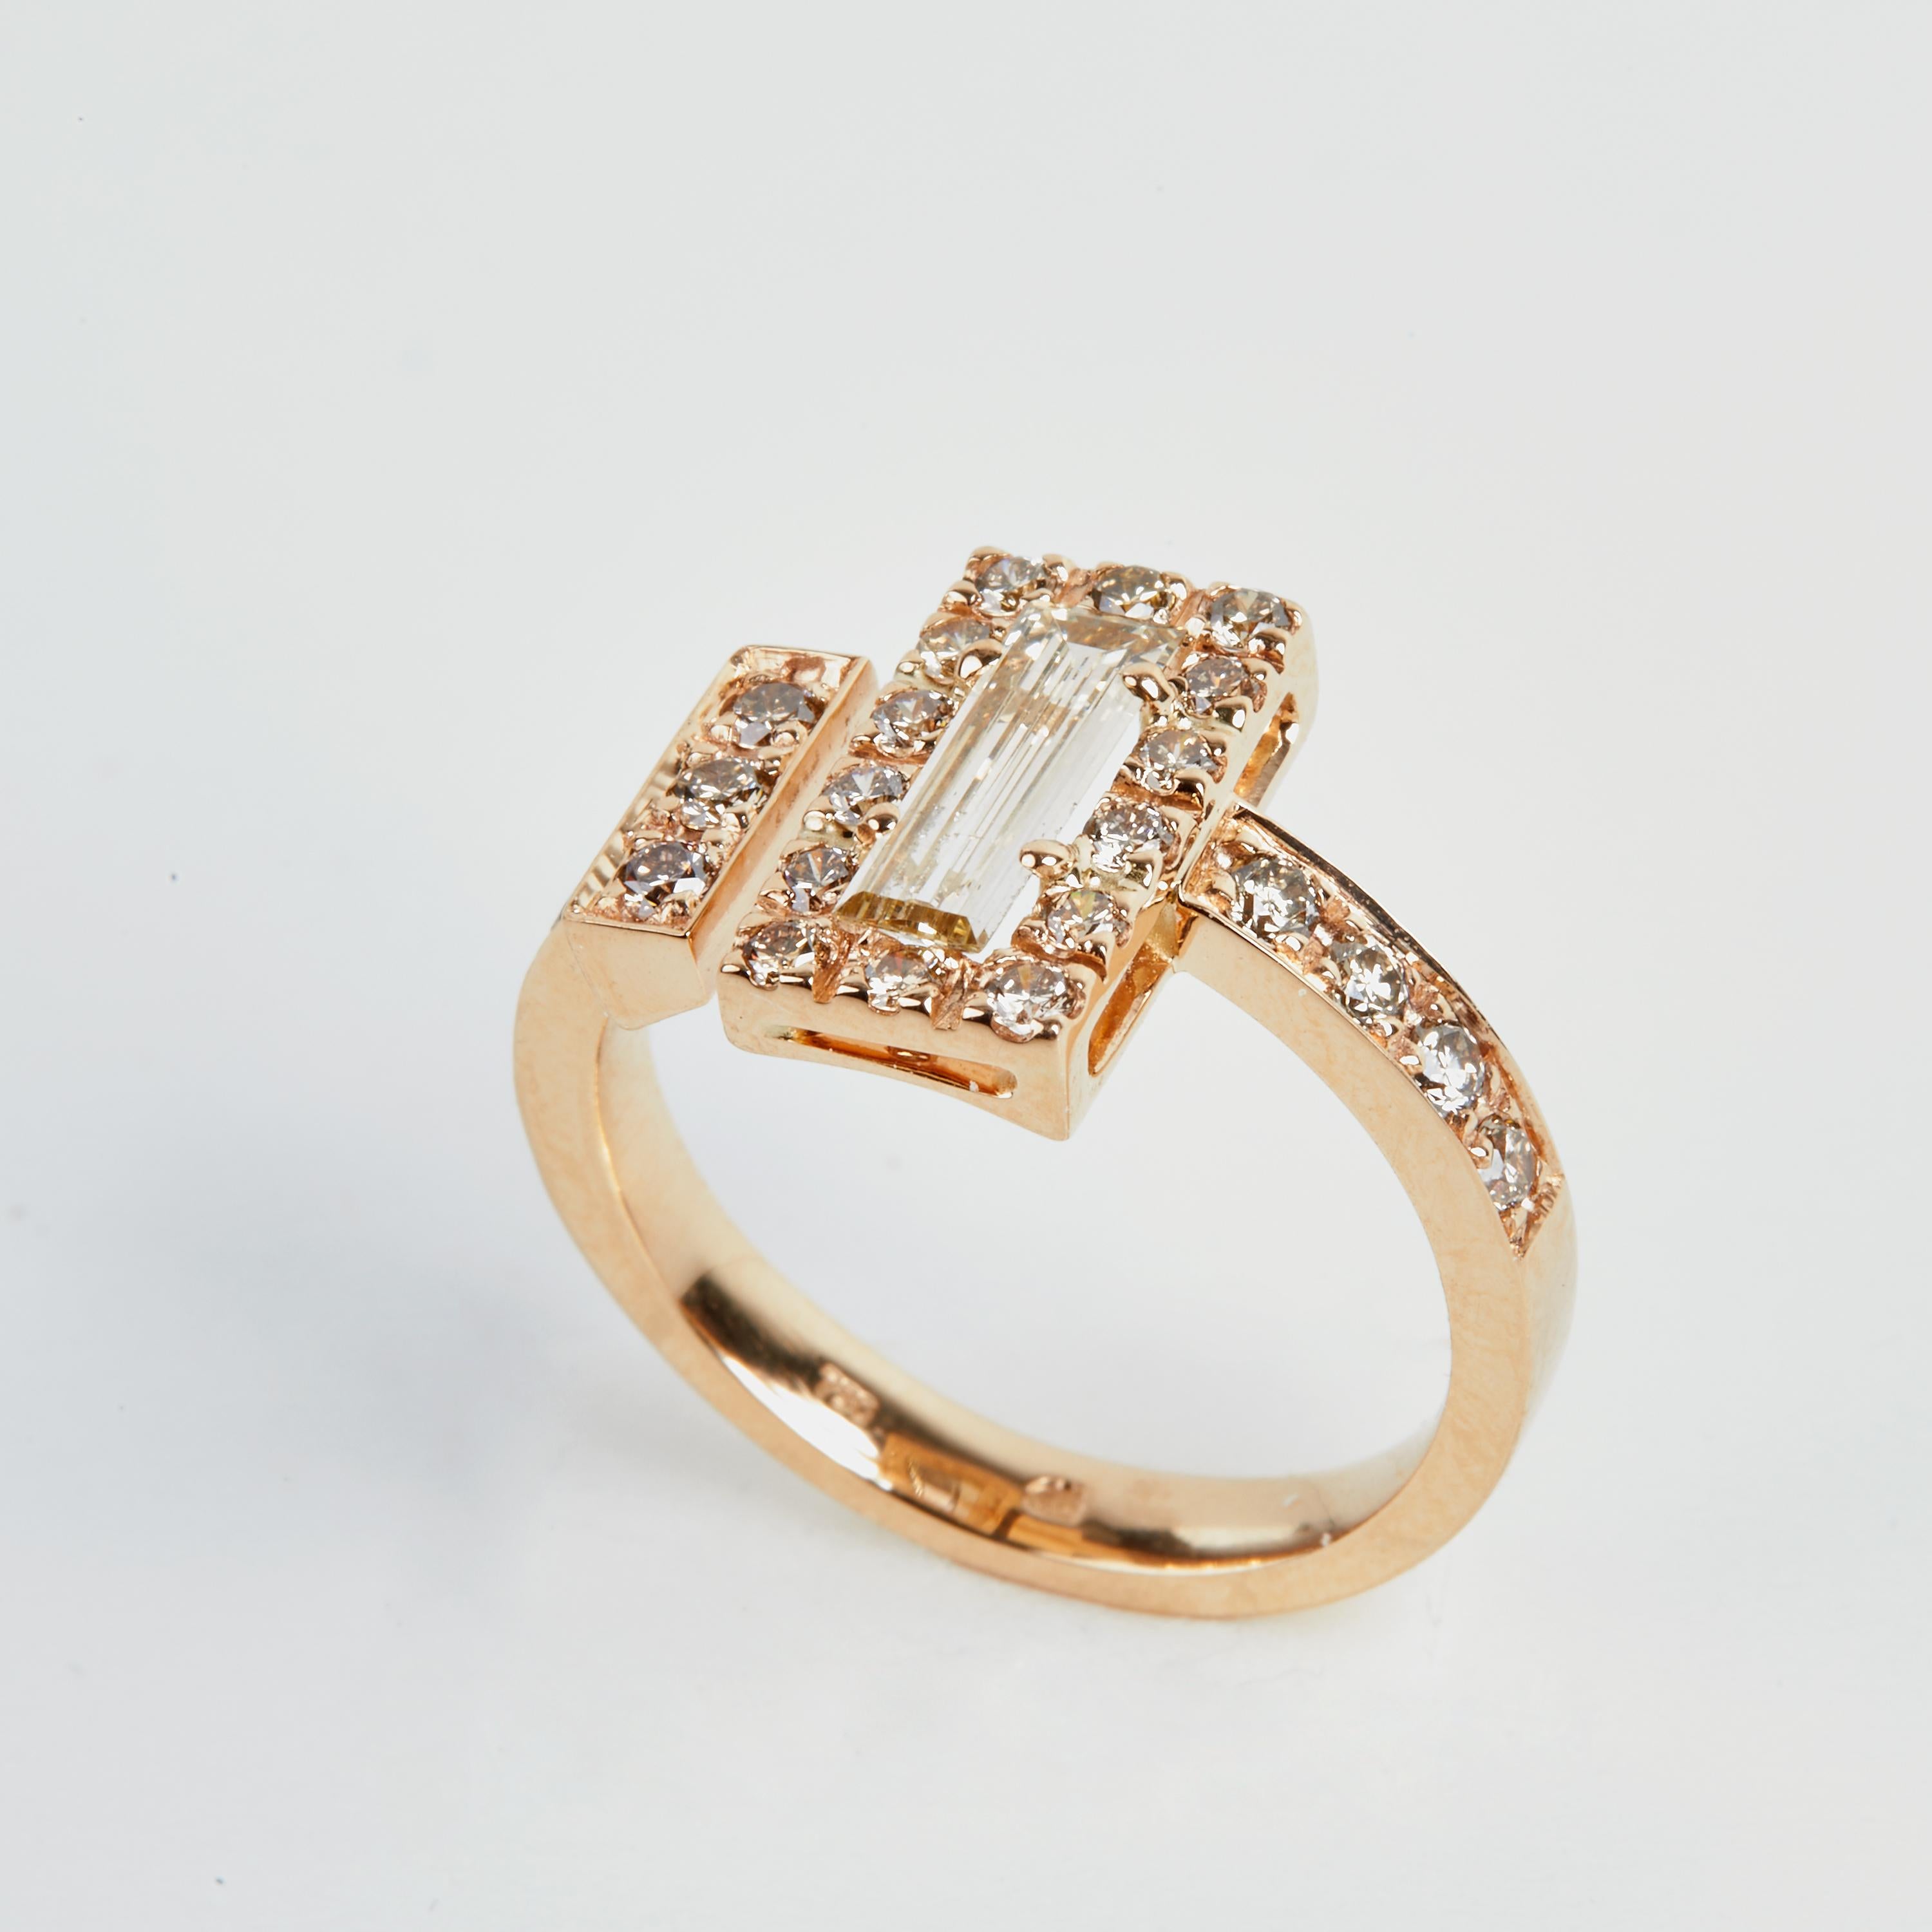 18 Karat Rose Gold Cognac Diamond  Cocktail Ring

25 Cognac Diamonds 0,58 Carat
1  Diamant  cognac  0.54 Carat




Founded in 1974, Gianni Lazzaro is a family-owned jewelery company based out of Düsseldorf, Germany.
Although rooted in Germany,